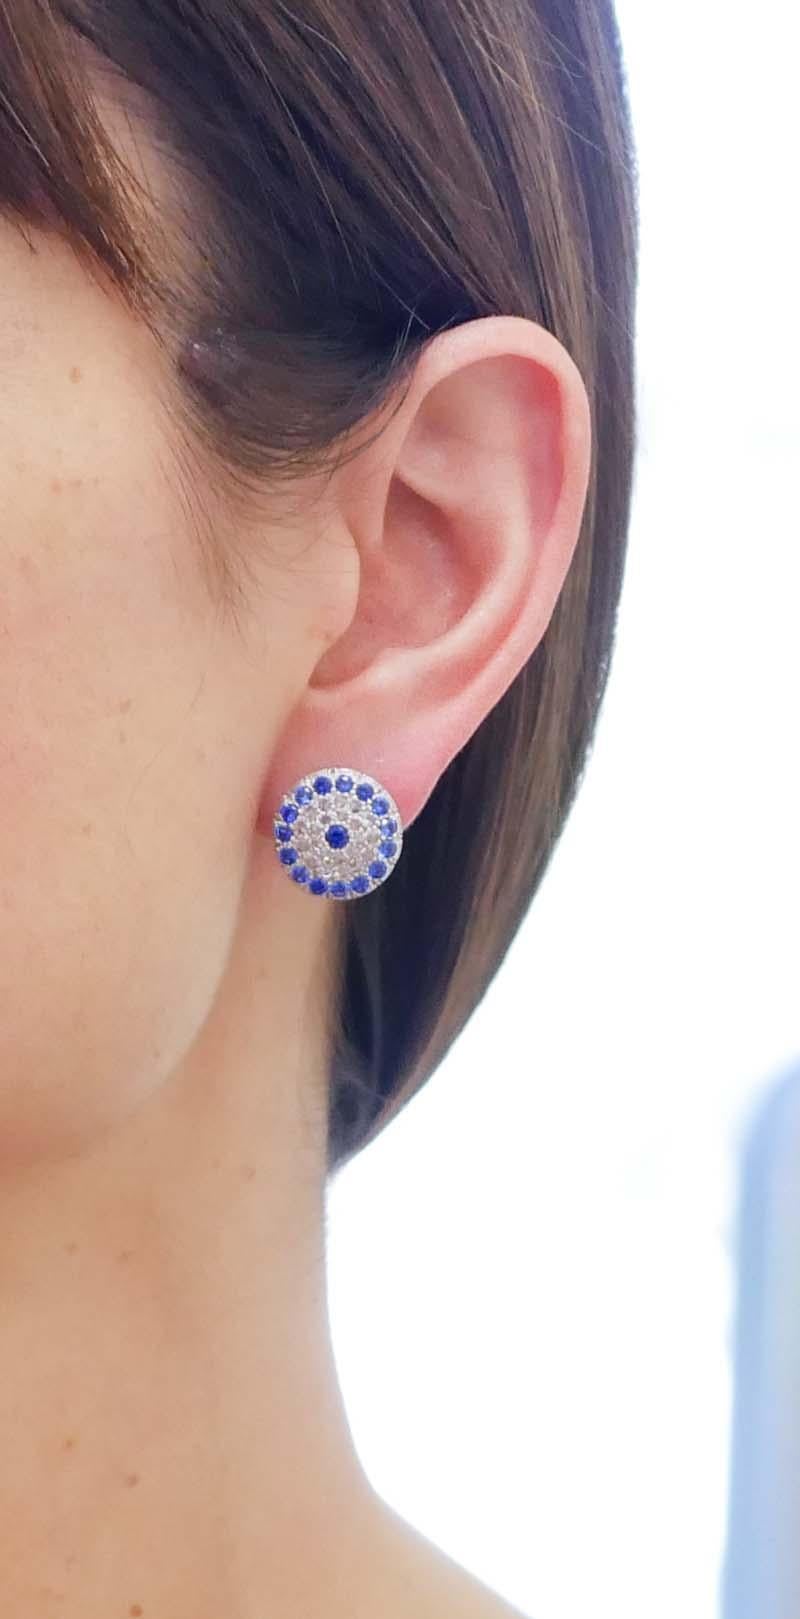 Women's White and Blue Stones, Rose Gold and Silver Retrò Earrings